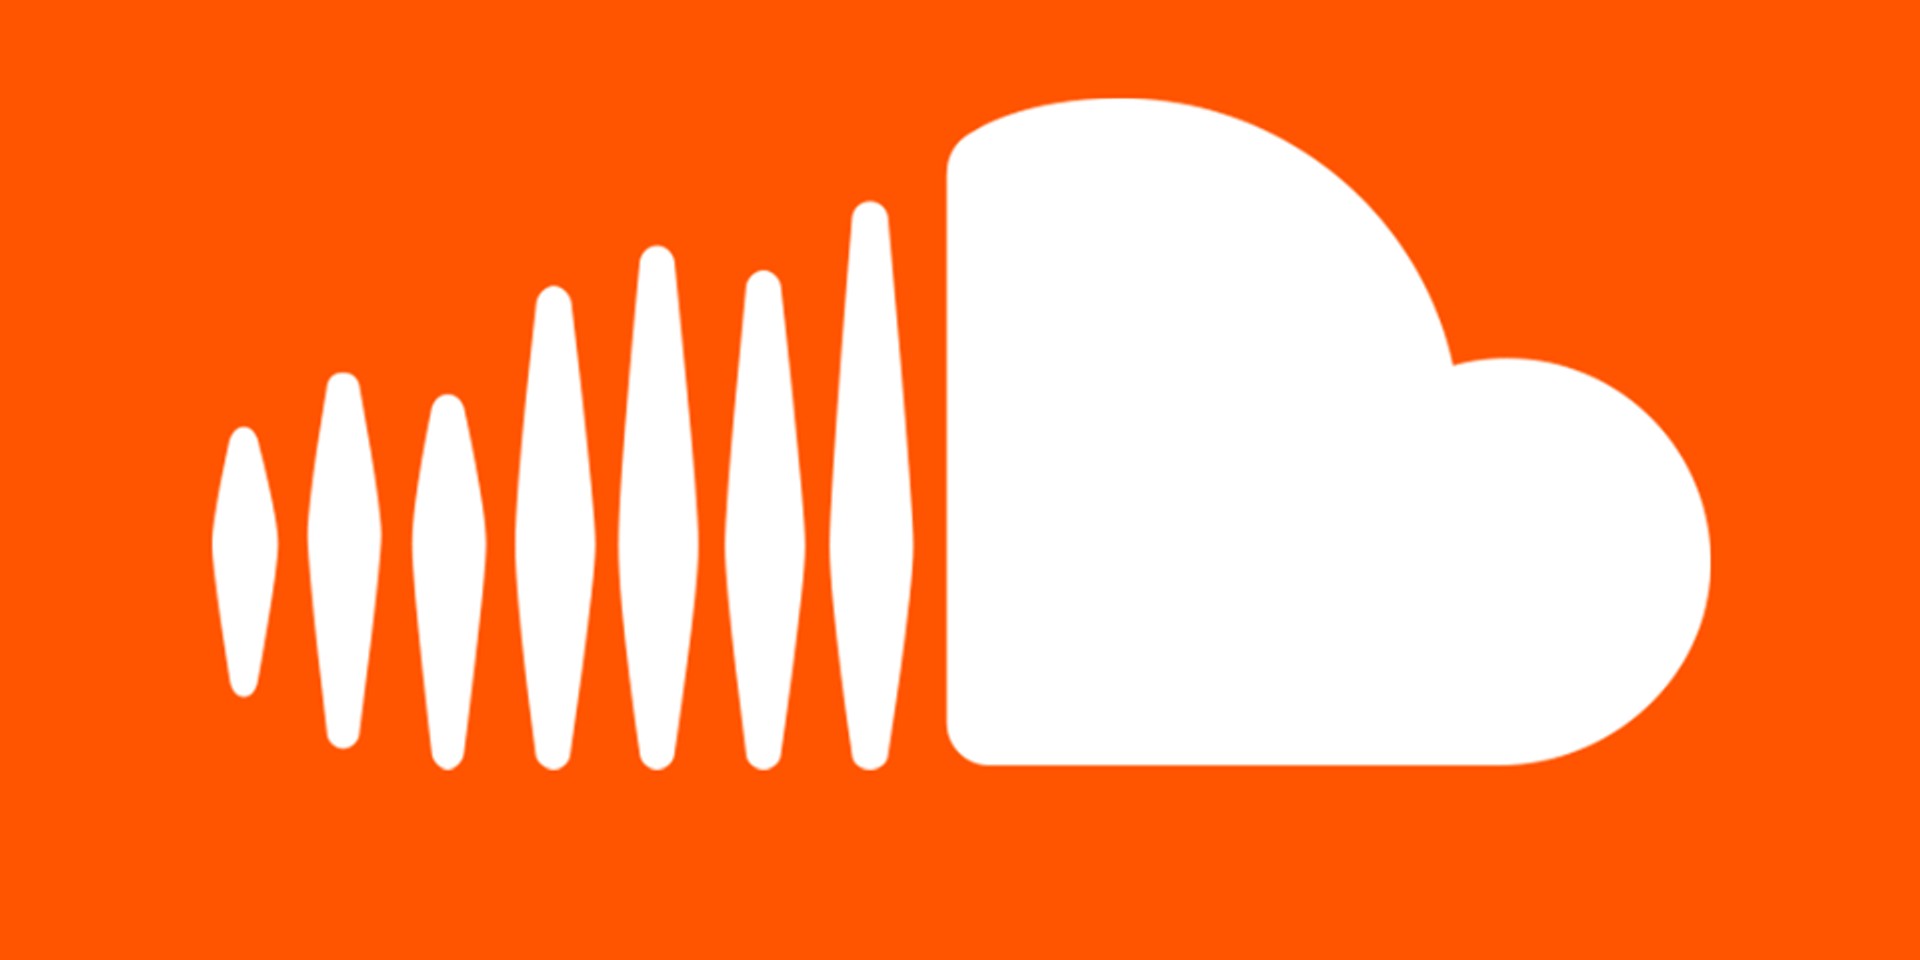 Soundcloud launches US$15M worth of initiatives to support musicians during coronavirus pandemic